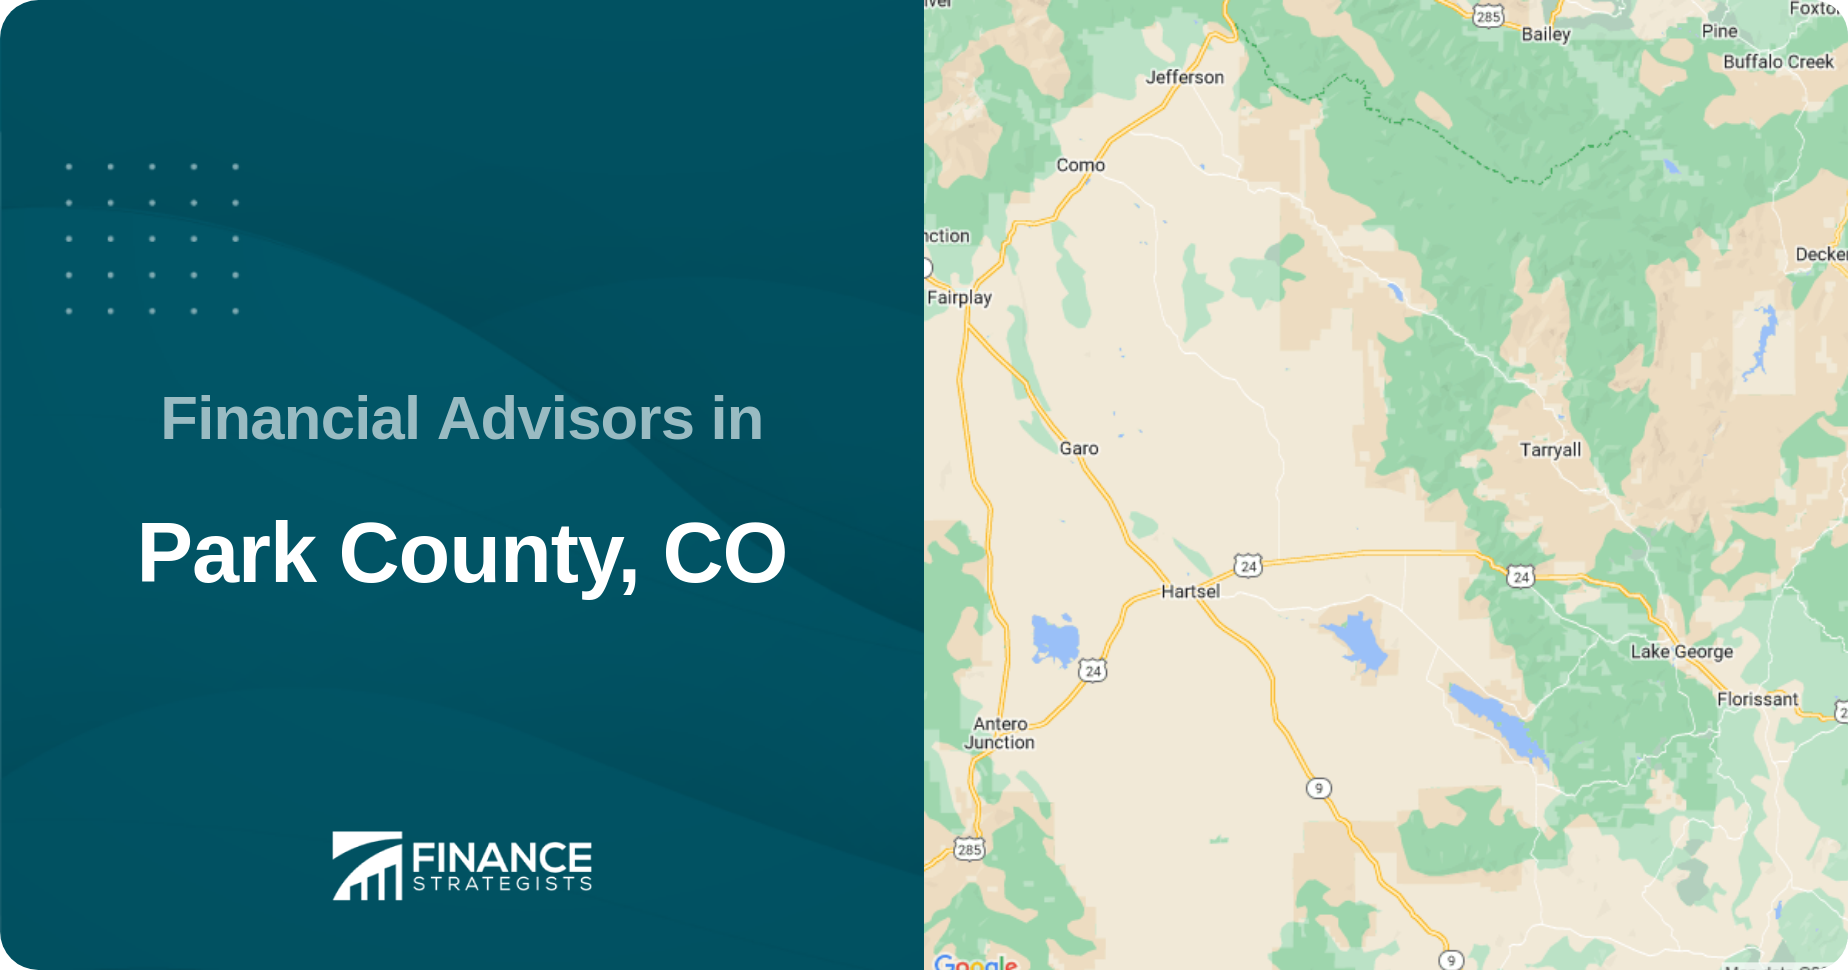 Financial Advisors in Park County, CO